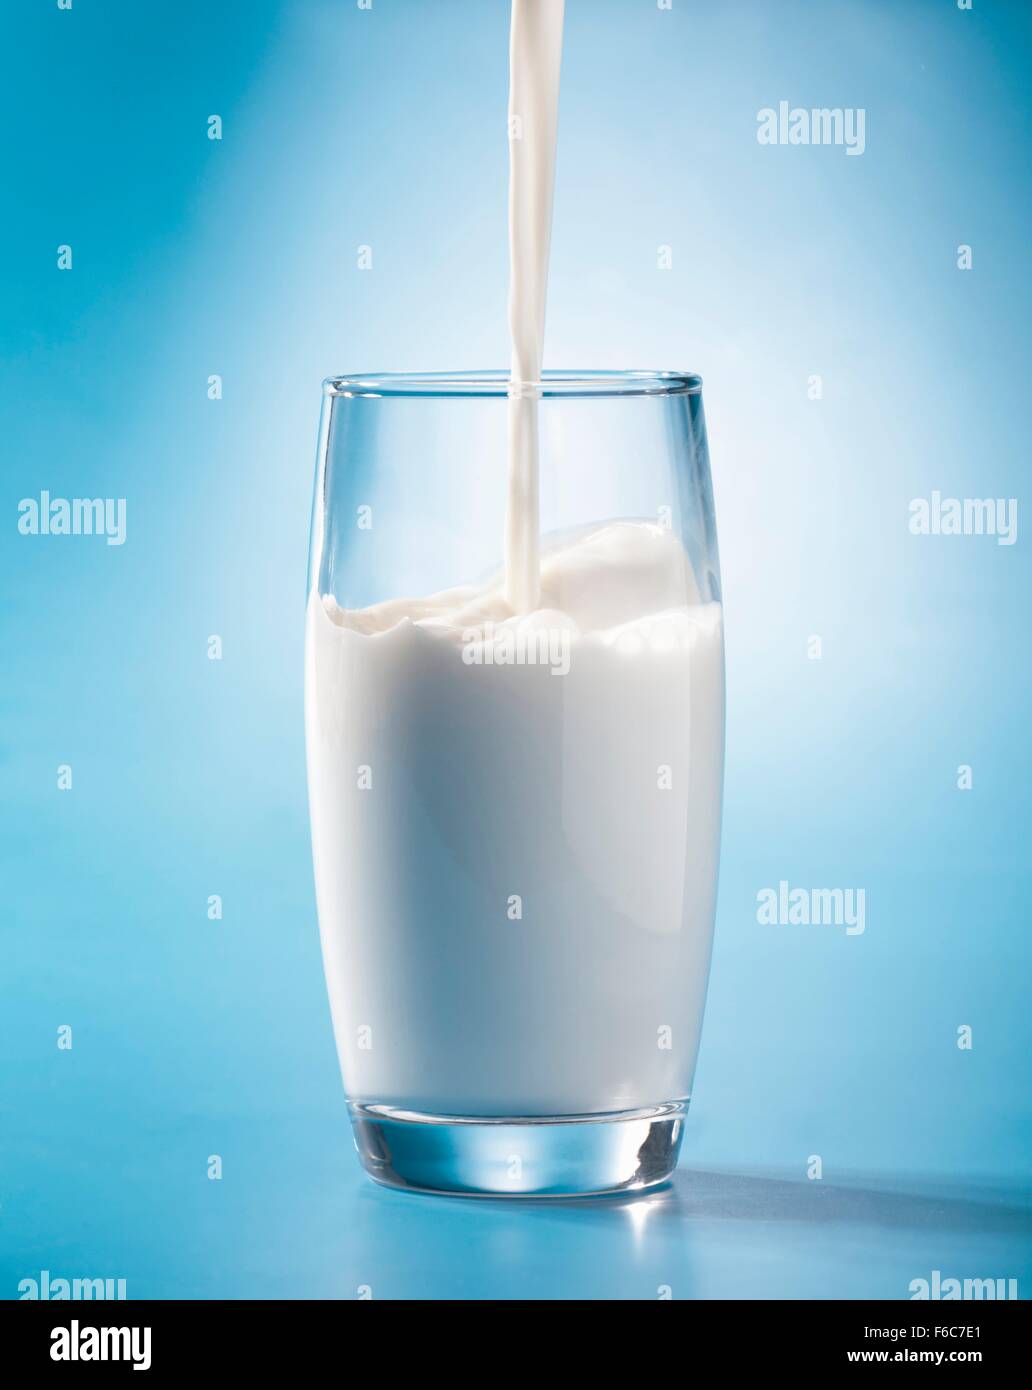 Pouring milk into a glass Stock Photo